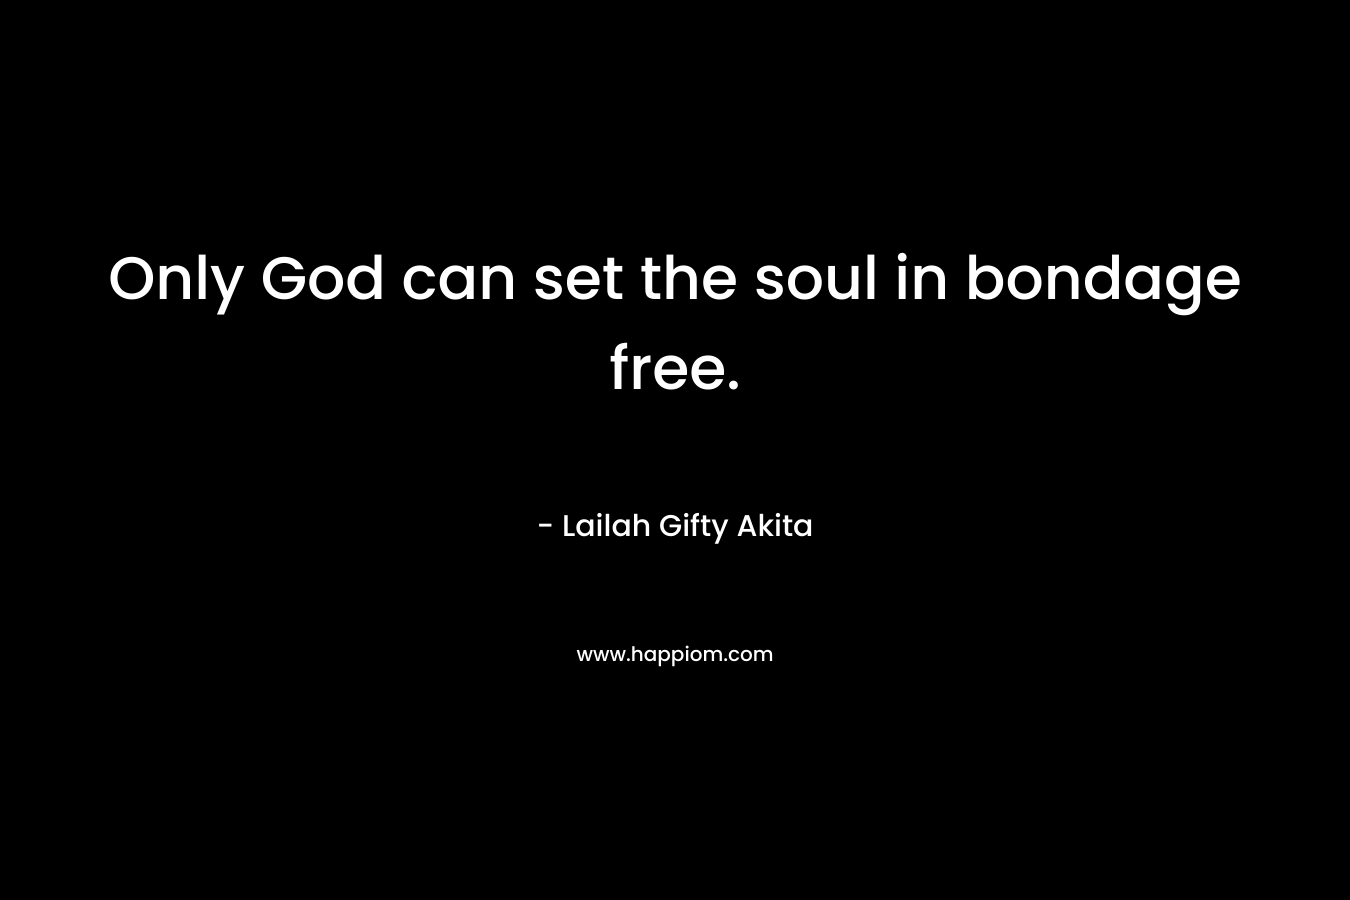 Only God can set the soul in bondage free. – Lailah Gifty Akita